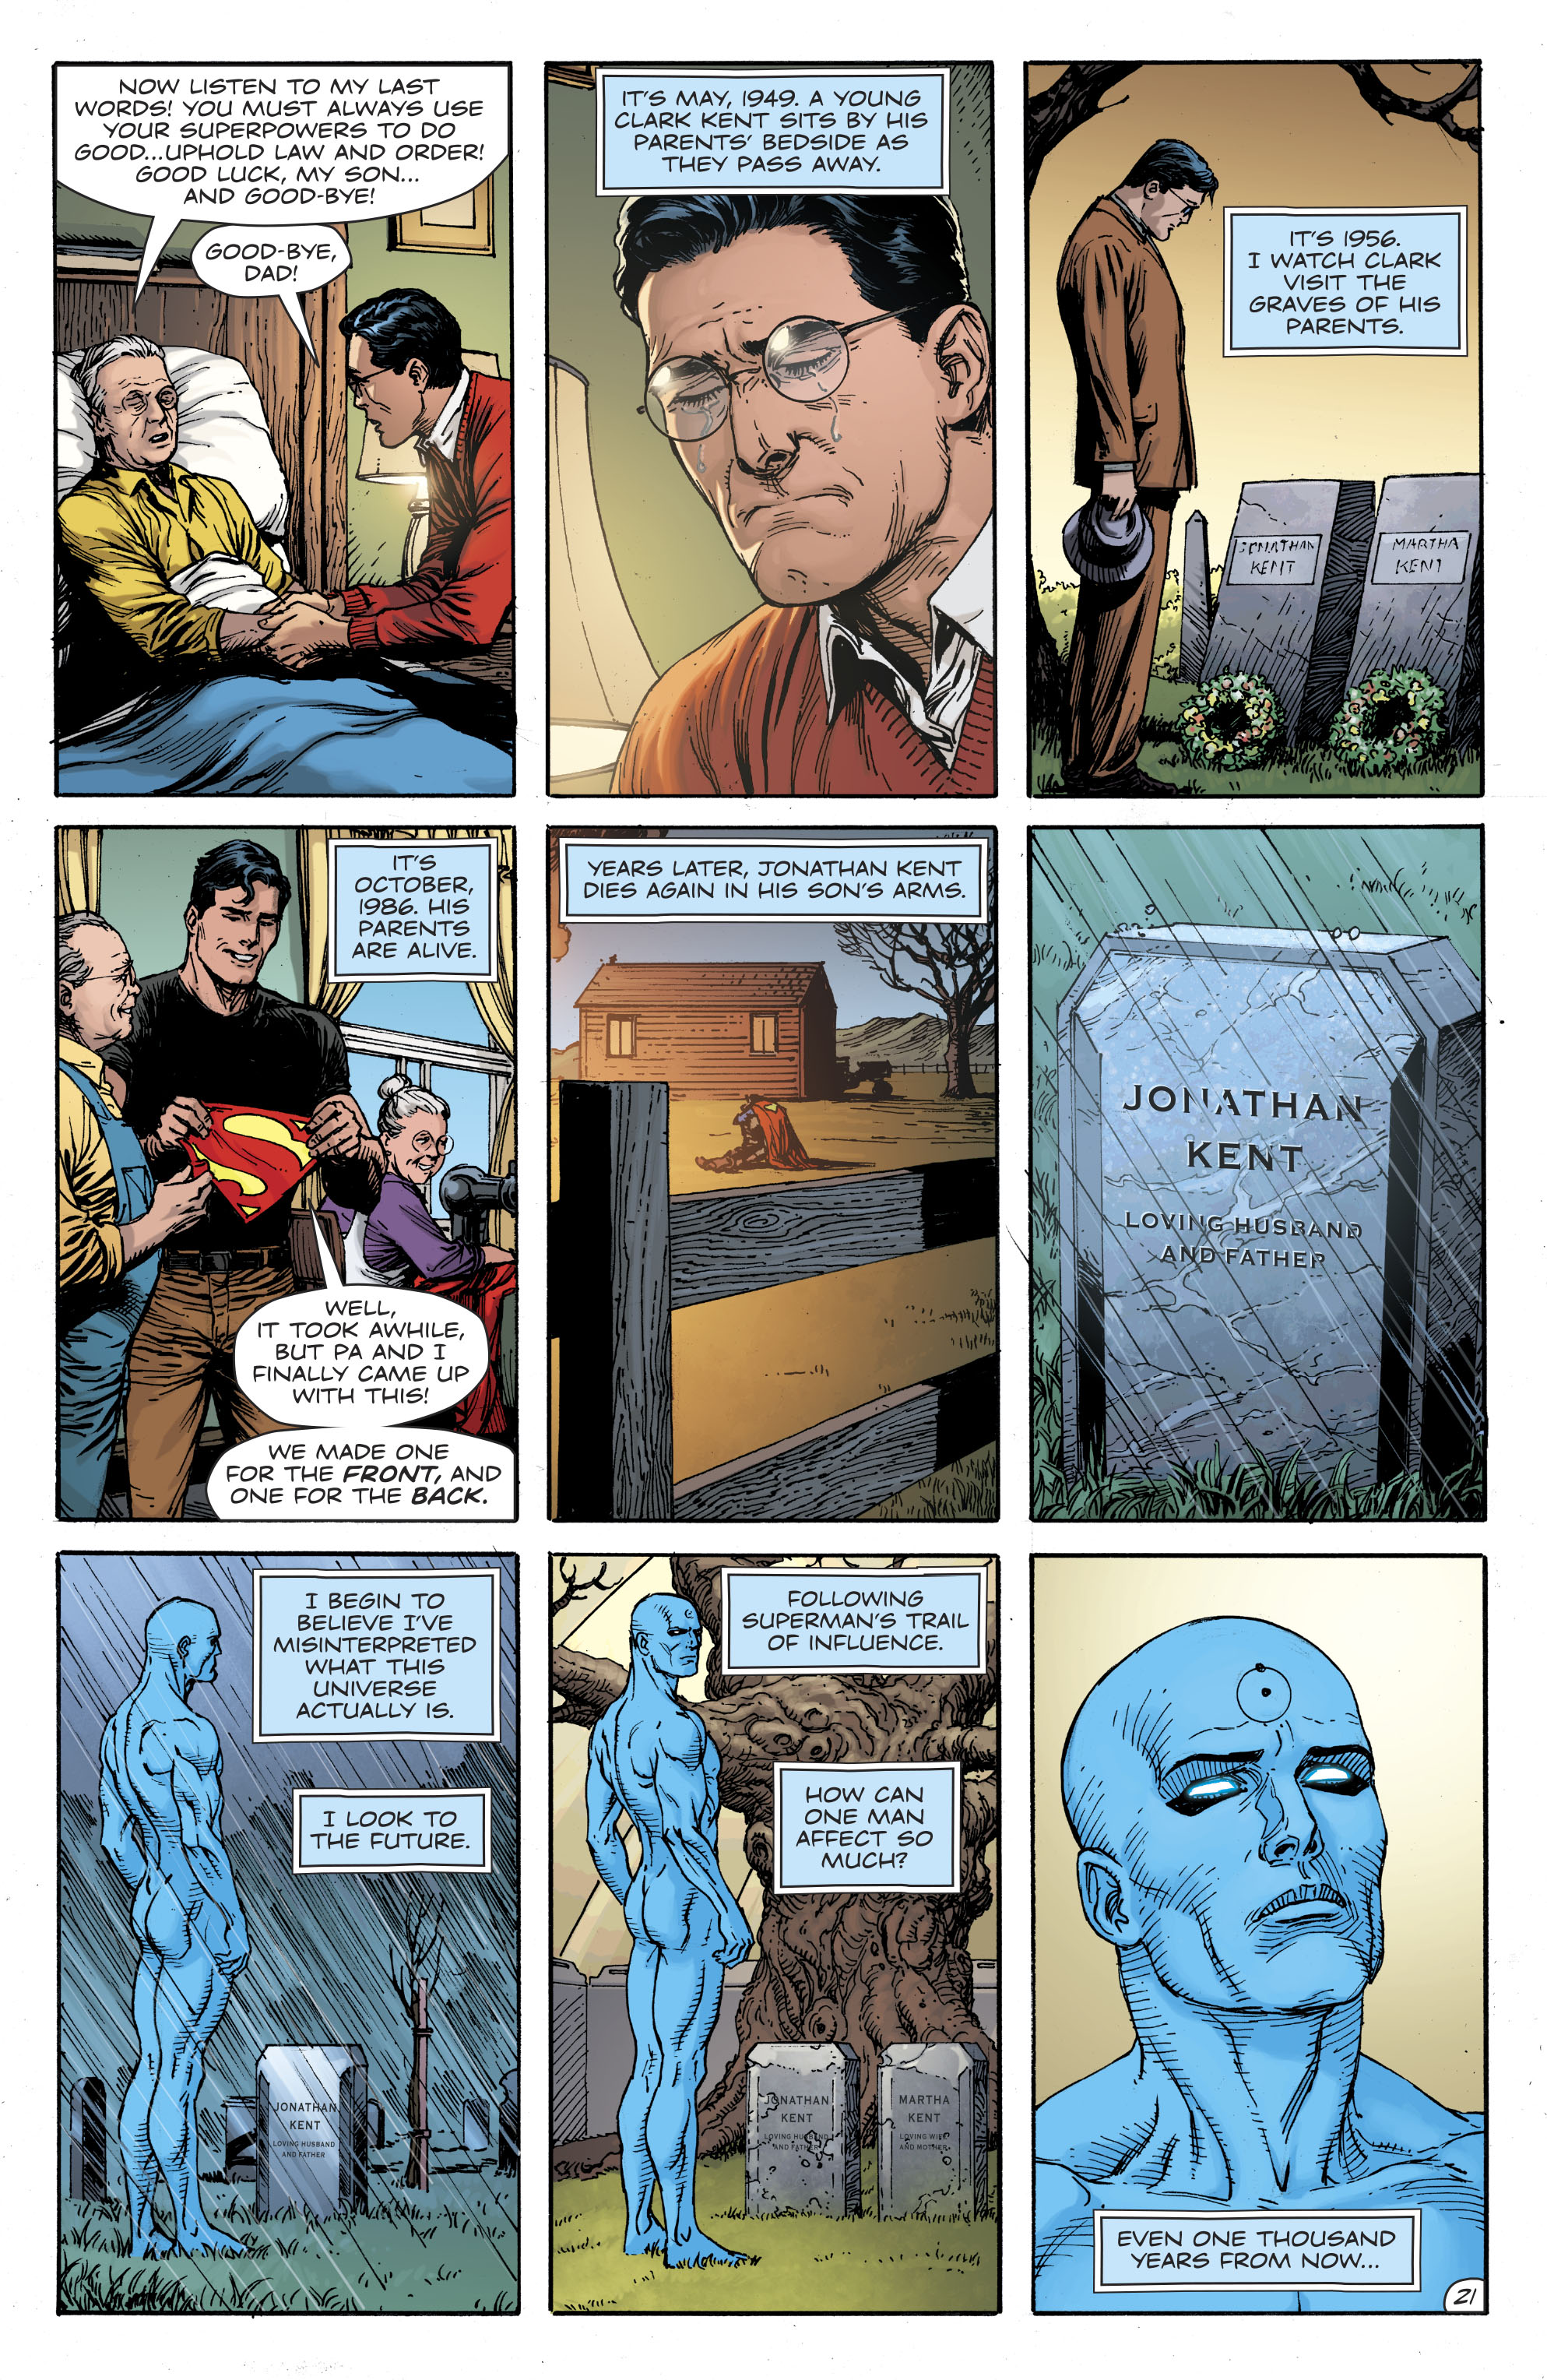 Doomsday Clock Issue 10 | Viewcomic reading comics online for free 2019